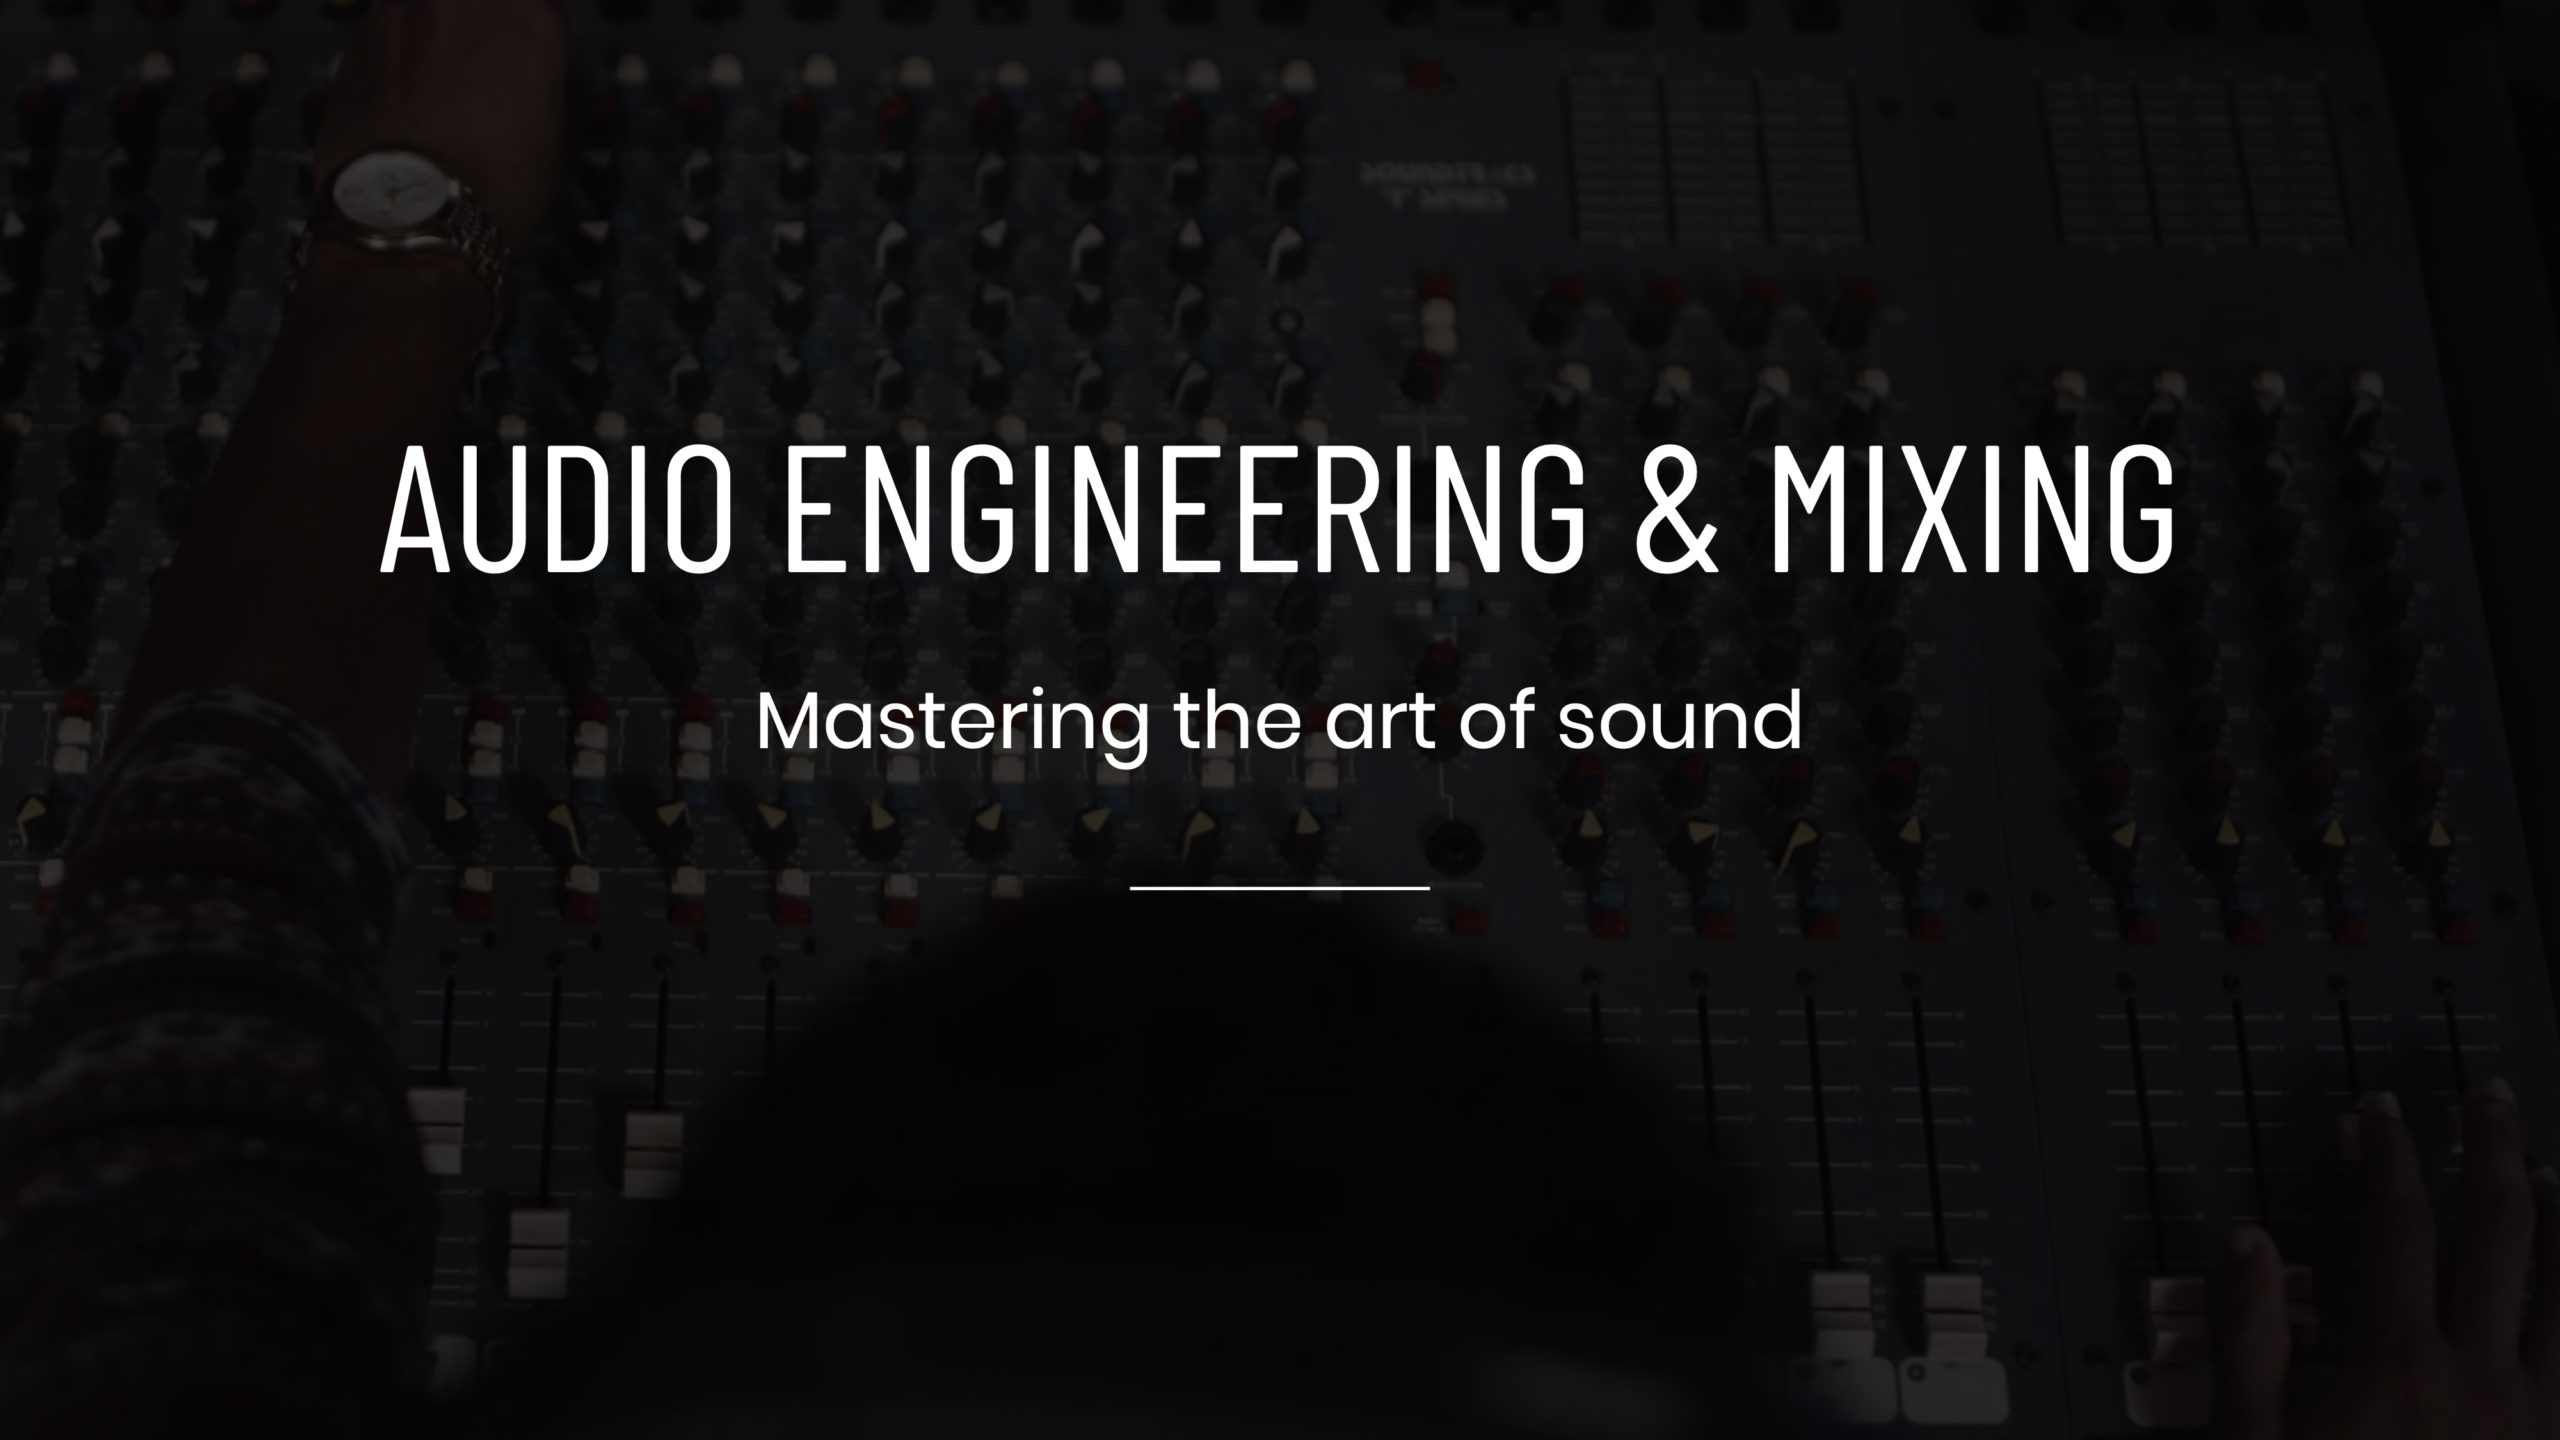 White Audio Engineering and Mixing Mastering the Art of Sound title Service Tile on dimmed background of controls